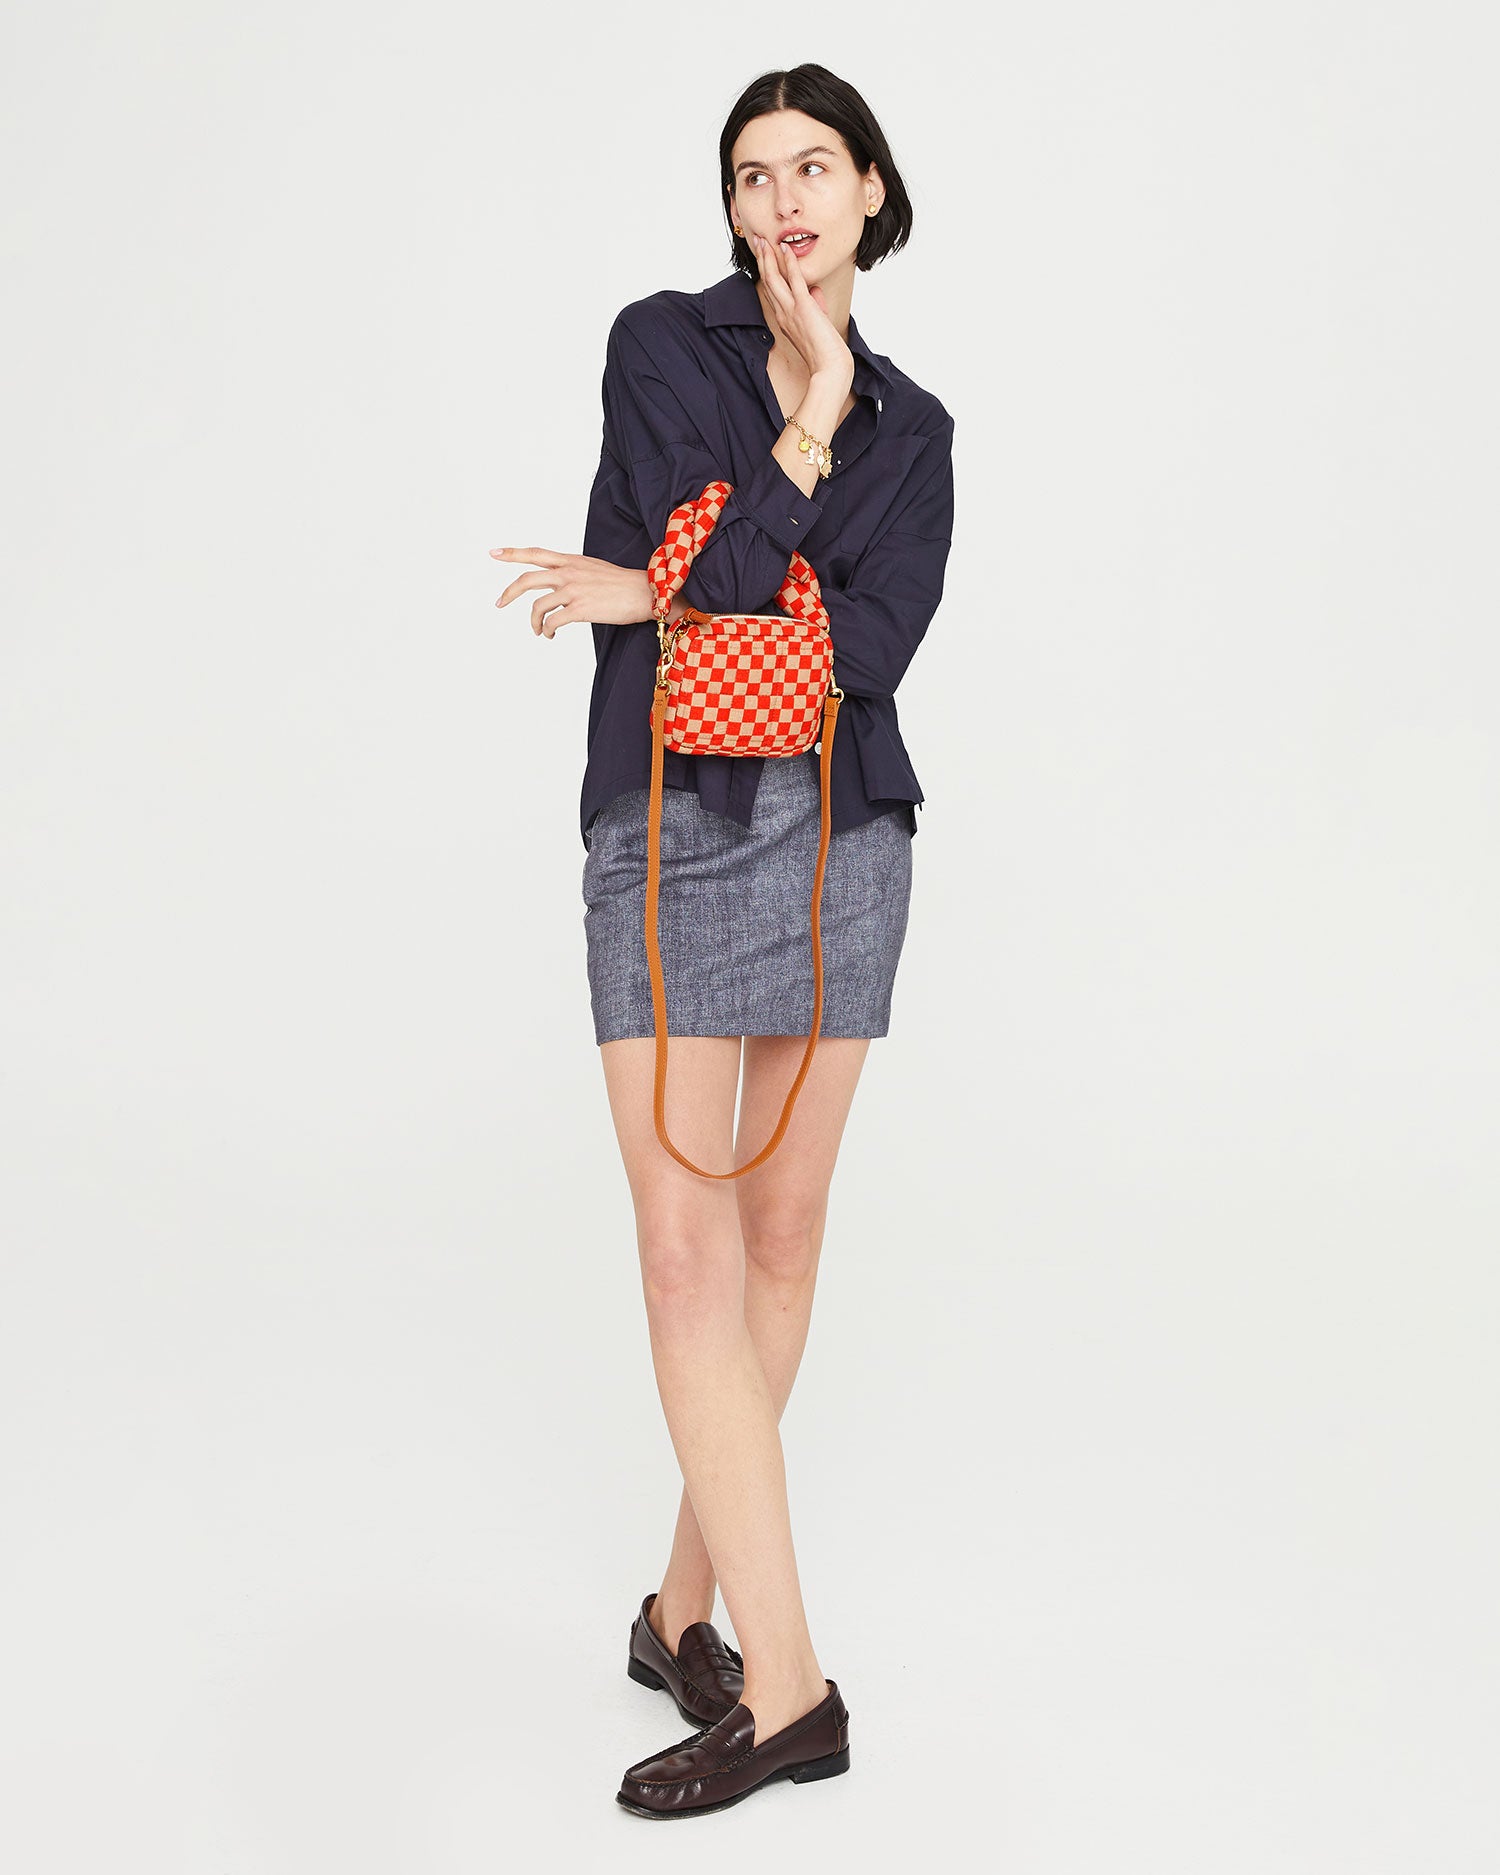 Clare V. Lucie Bag - Poppy/Khaki Quilted Checker - FINAL SALE